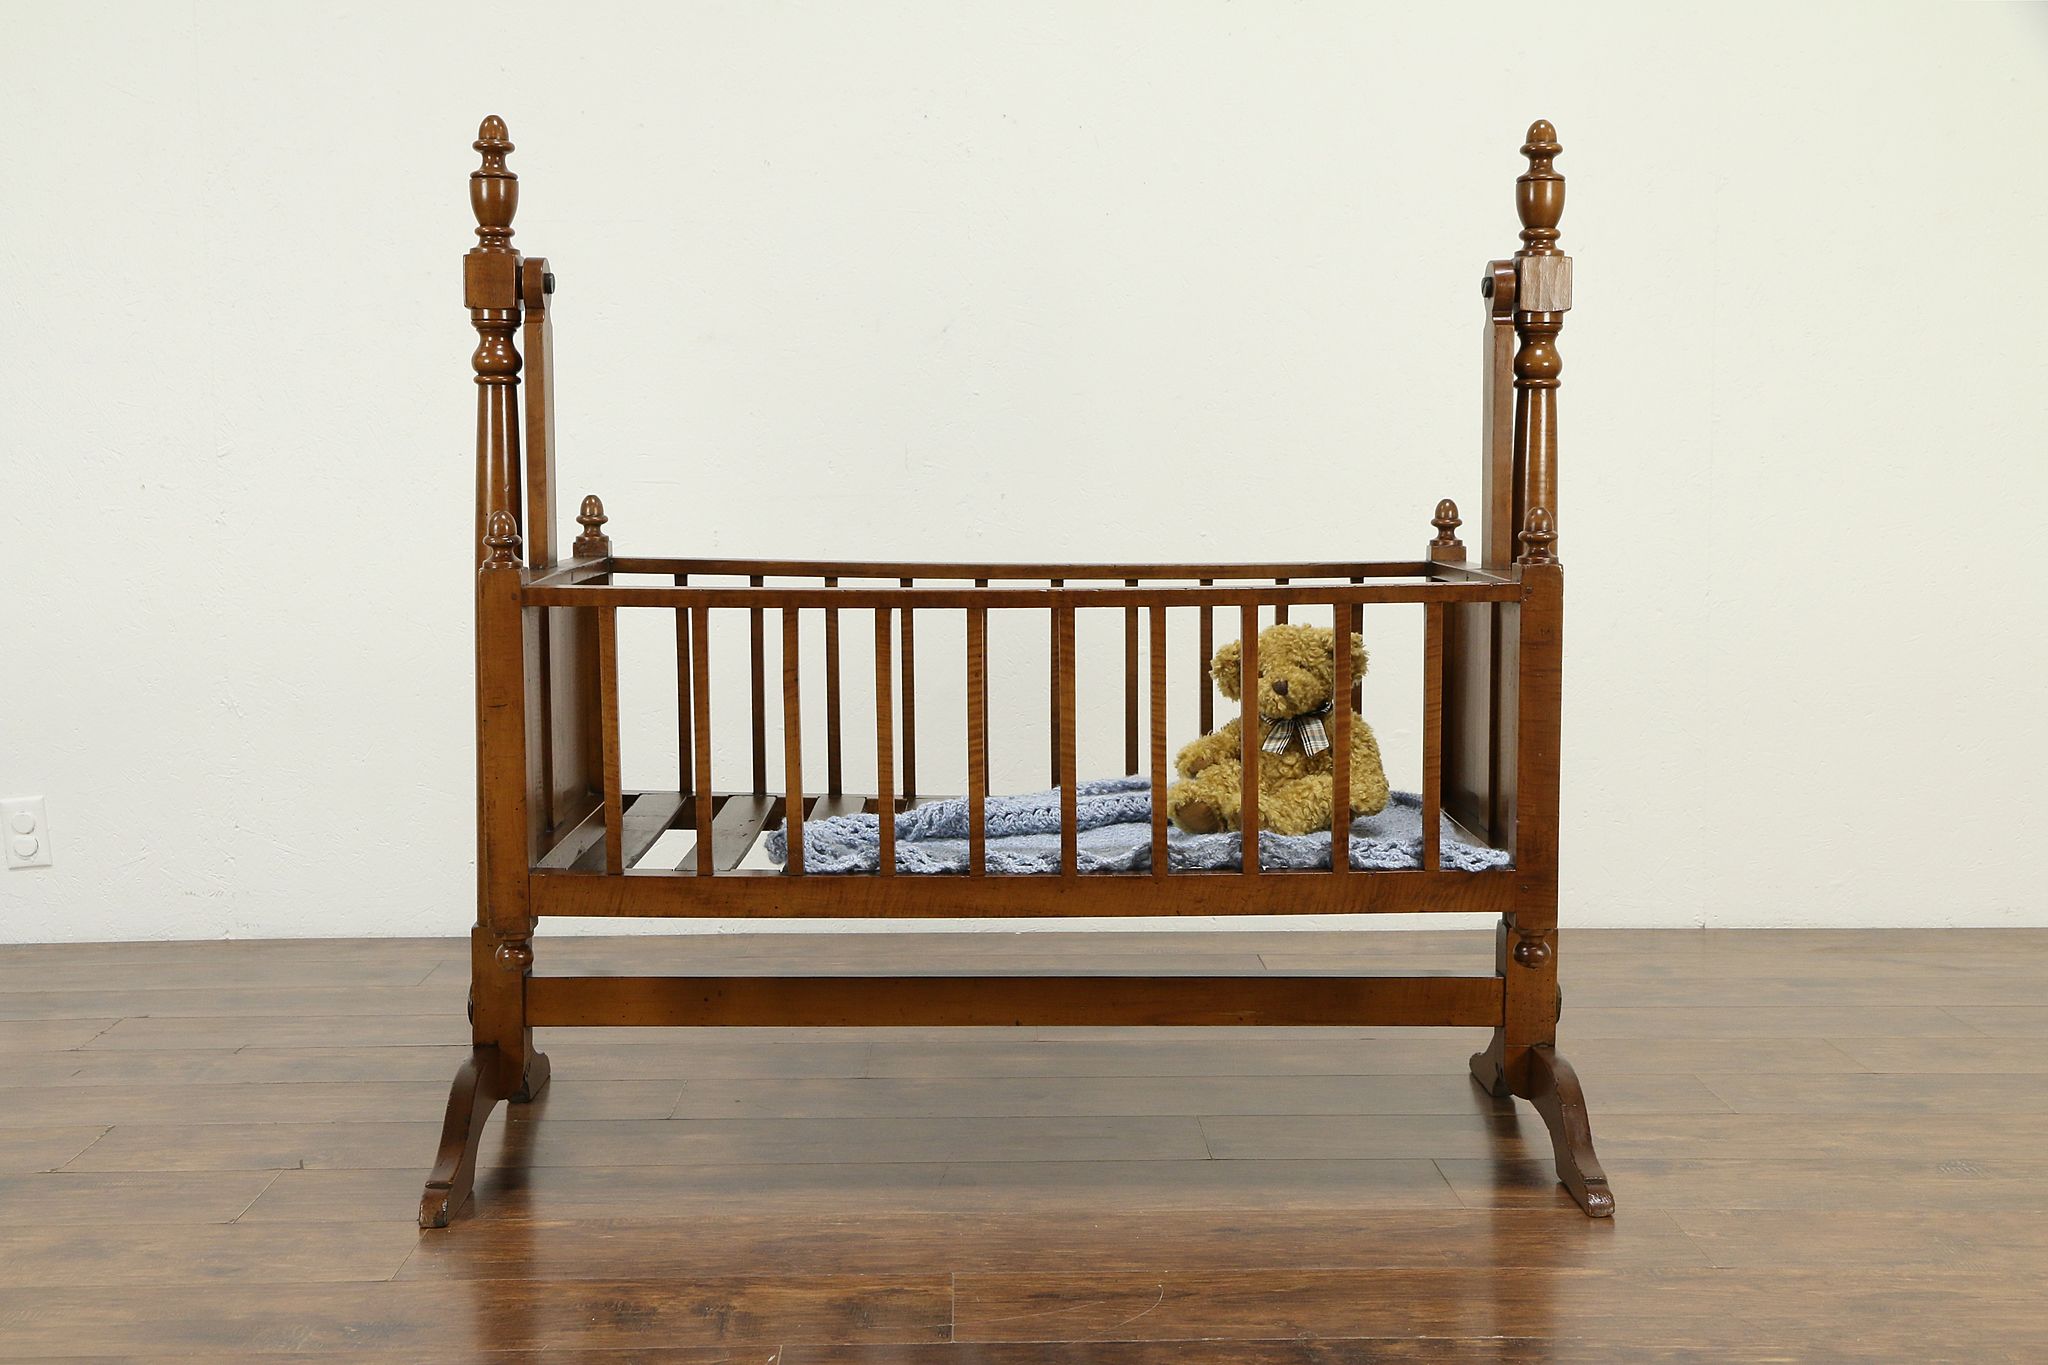 baby cradle for bed